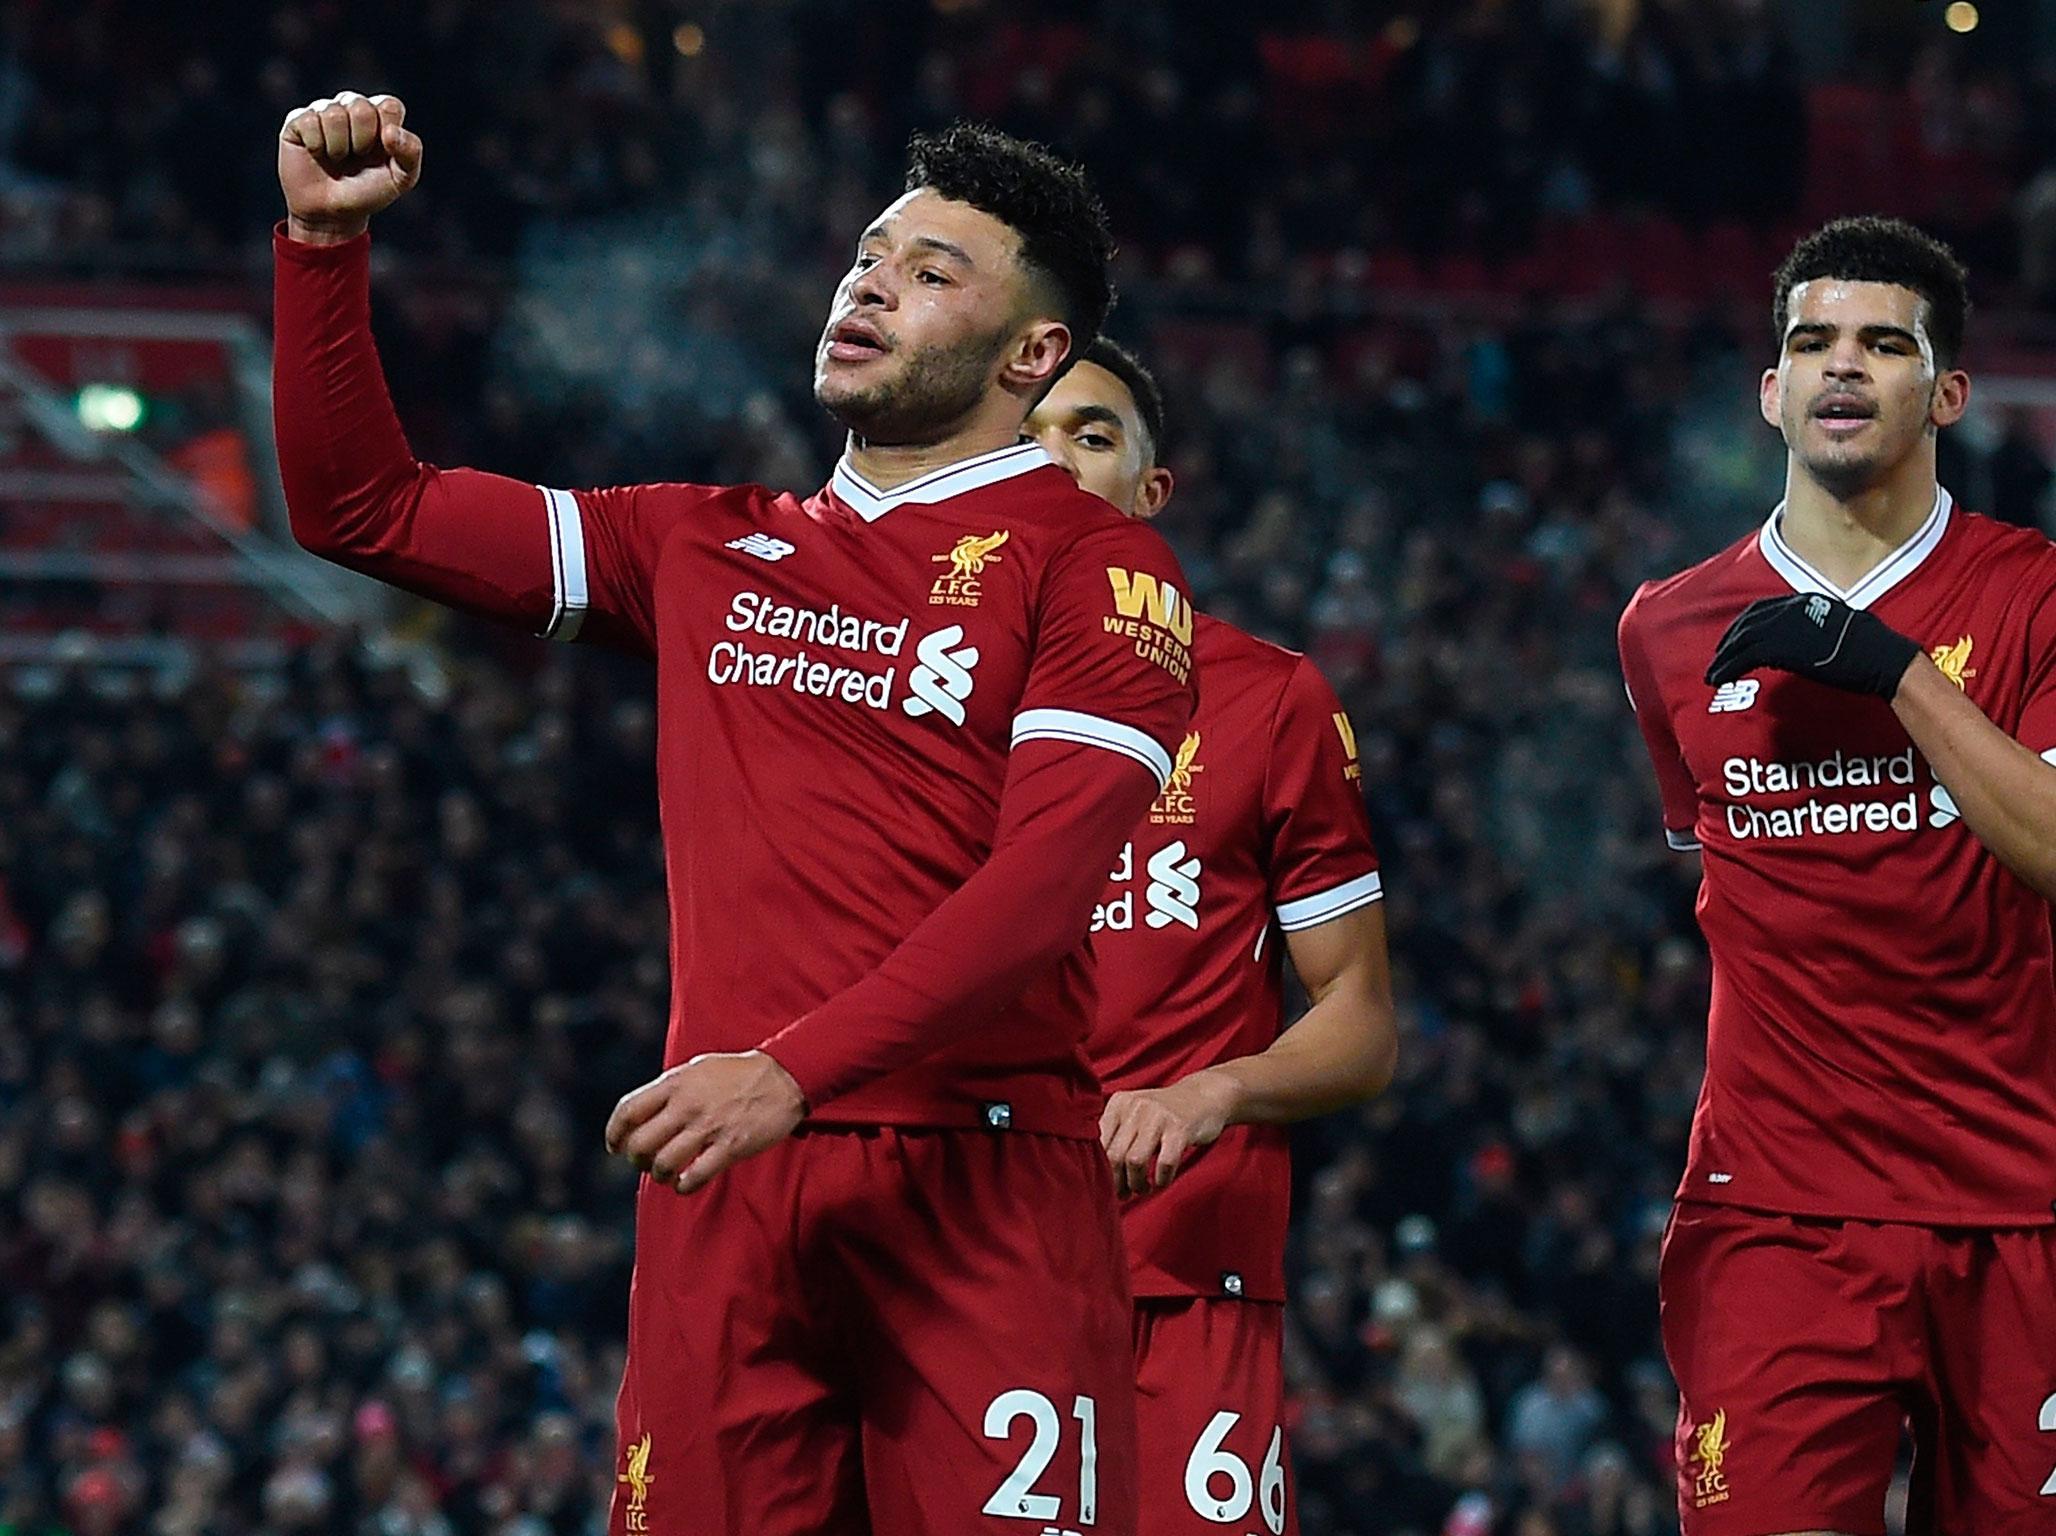 Alex Oxlade-Chamberlain has impressed in recent weeks for Liverpool